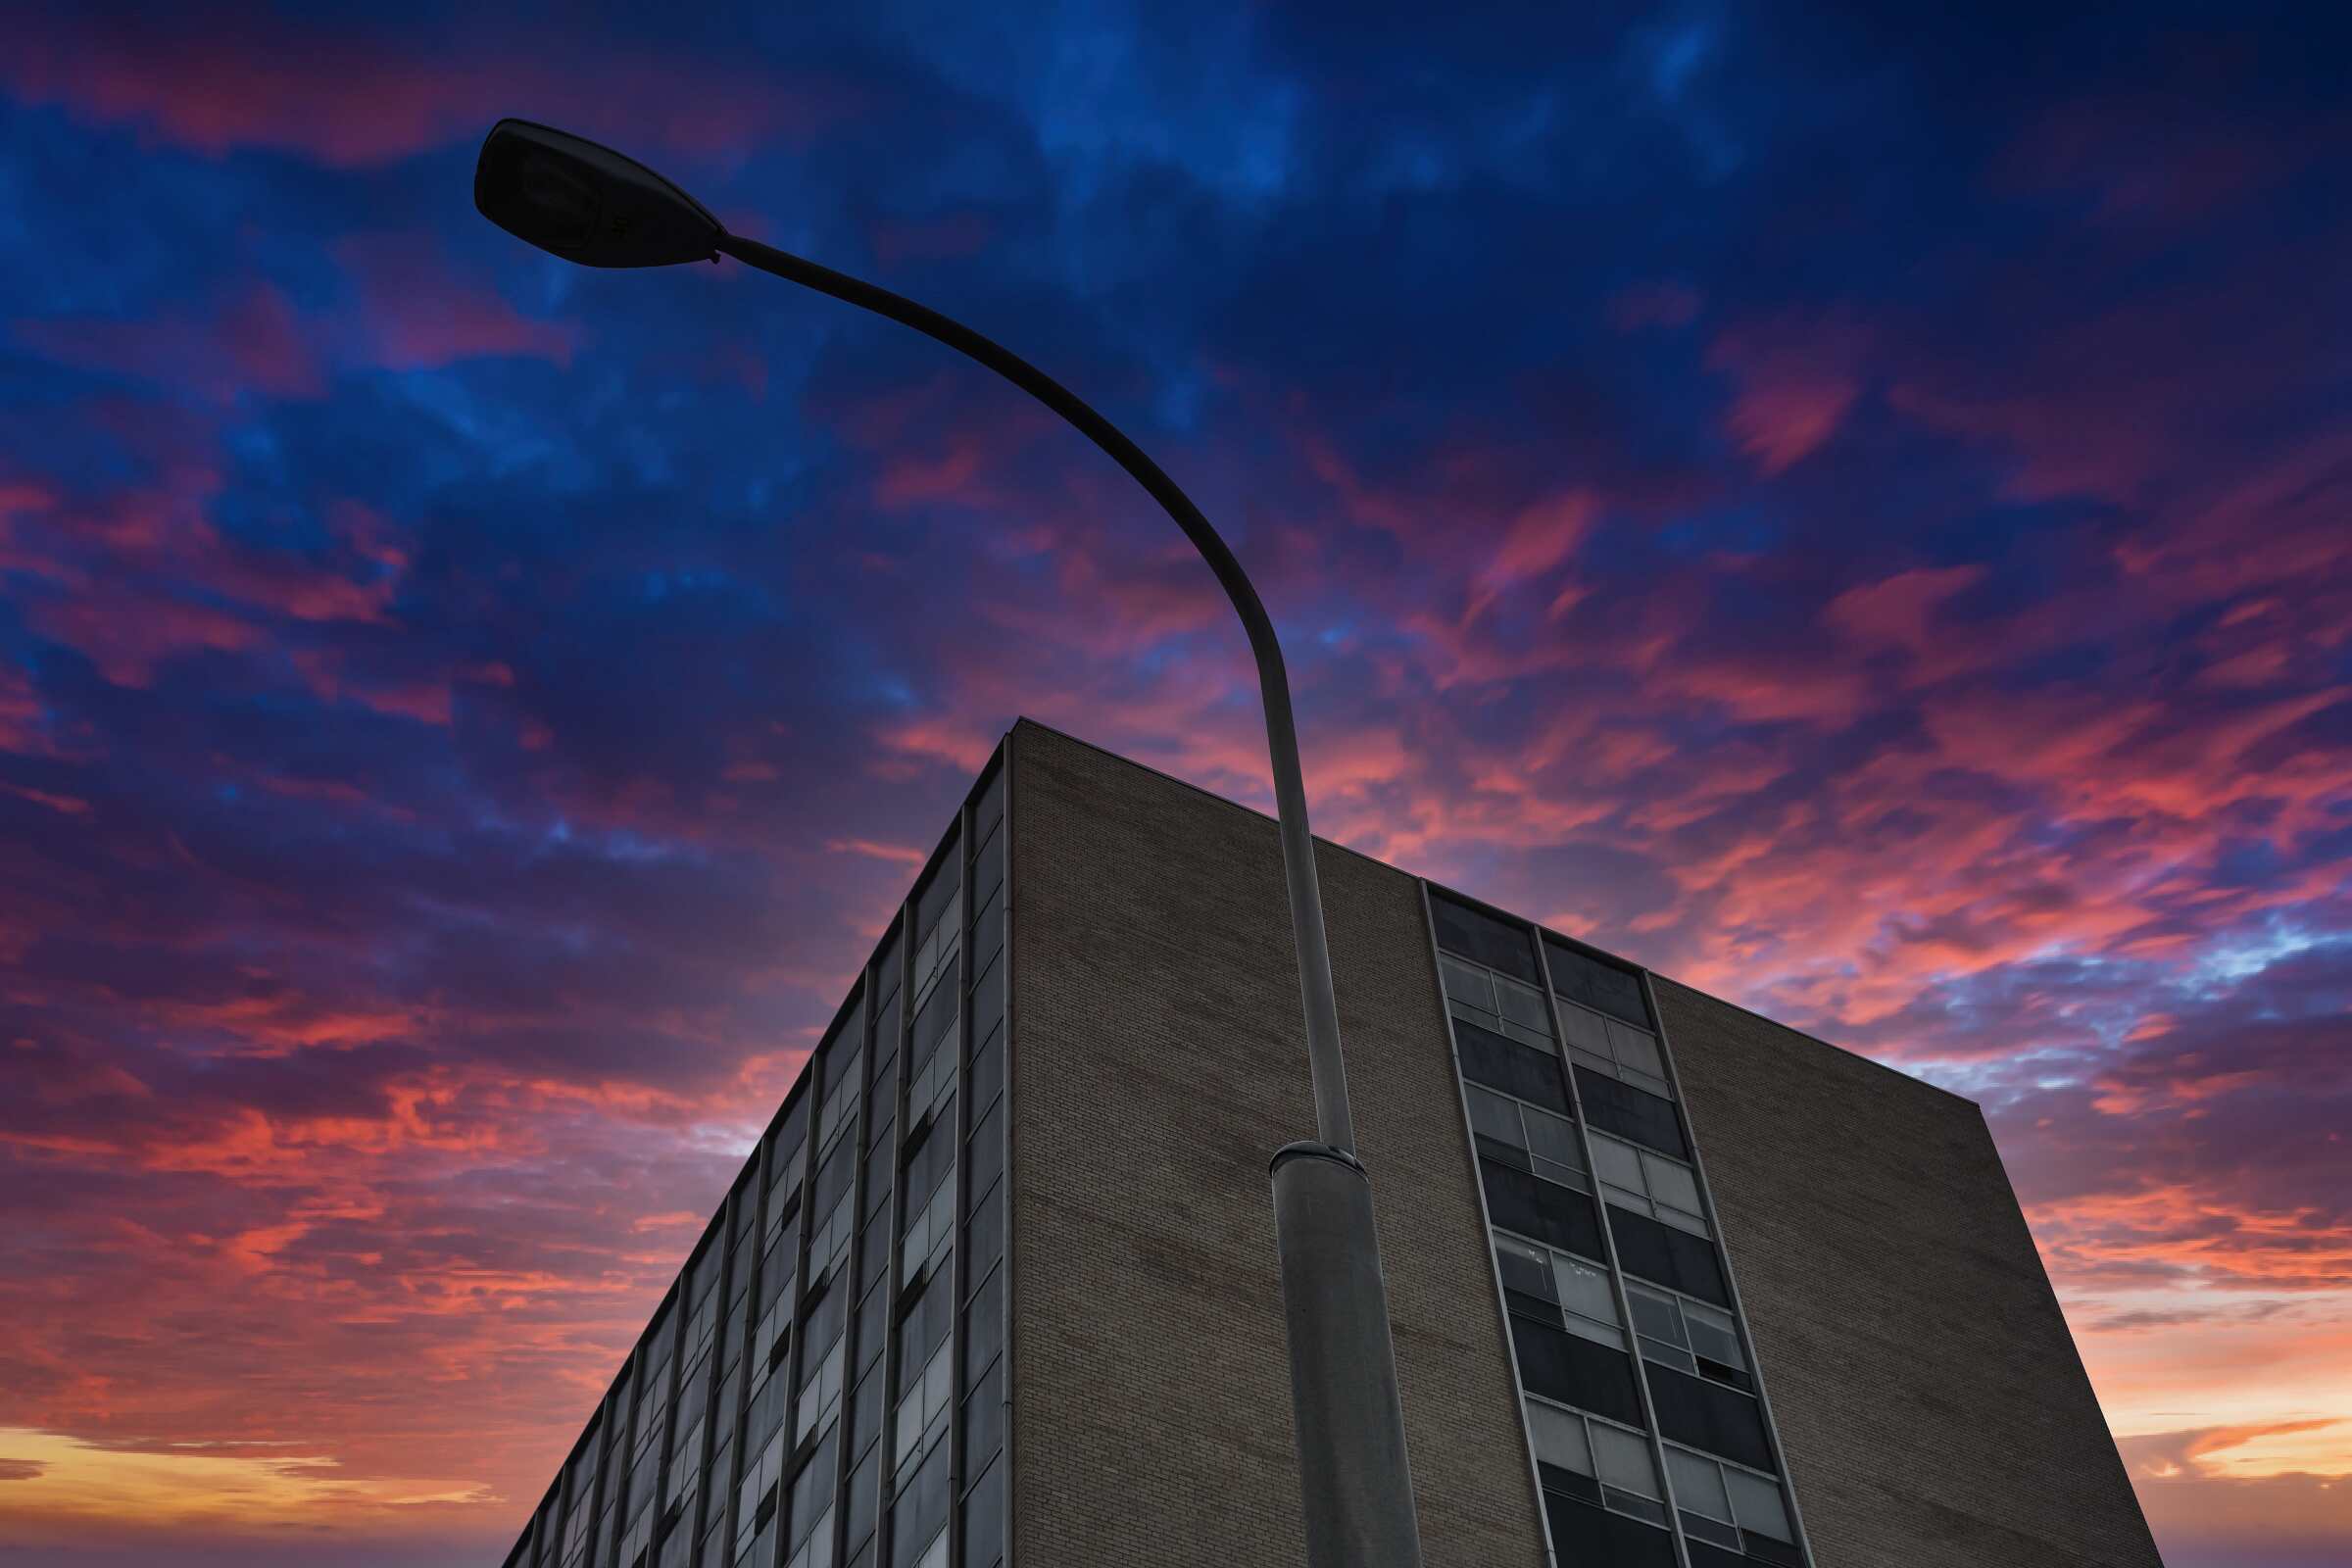 Looking up at a lamppost and a building and a dramatic sky edited in.